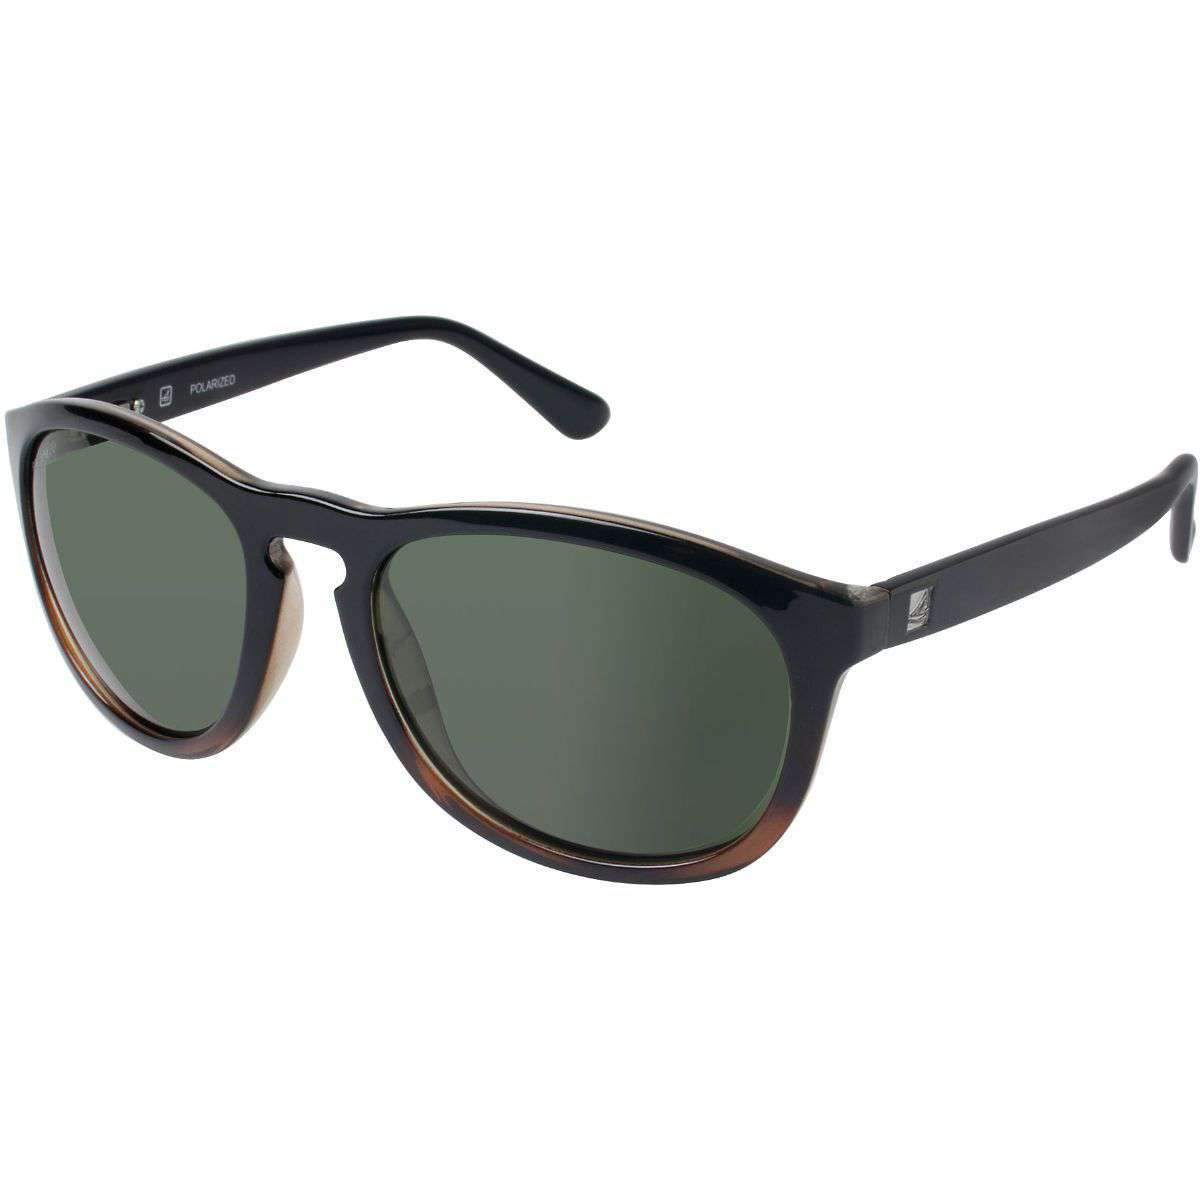 Fenwick Polarized Sunglasses in Black and Tortoise Fade by Sperry - Country Club Prep